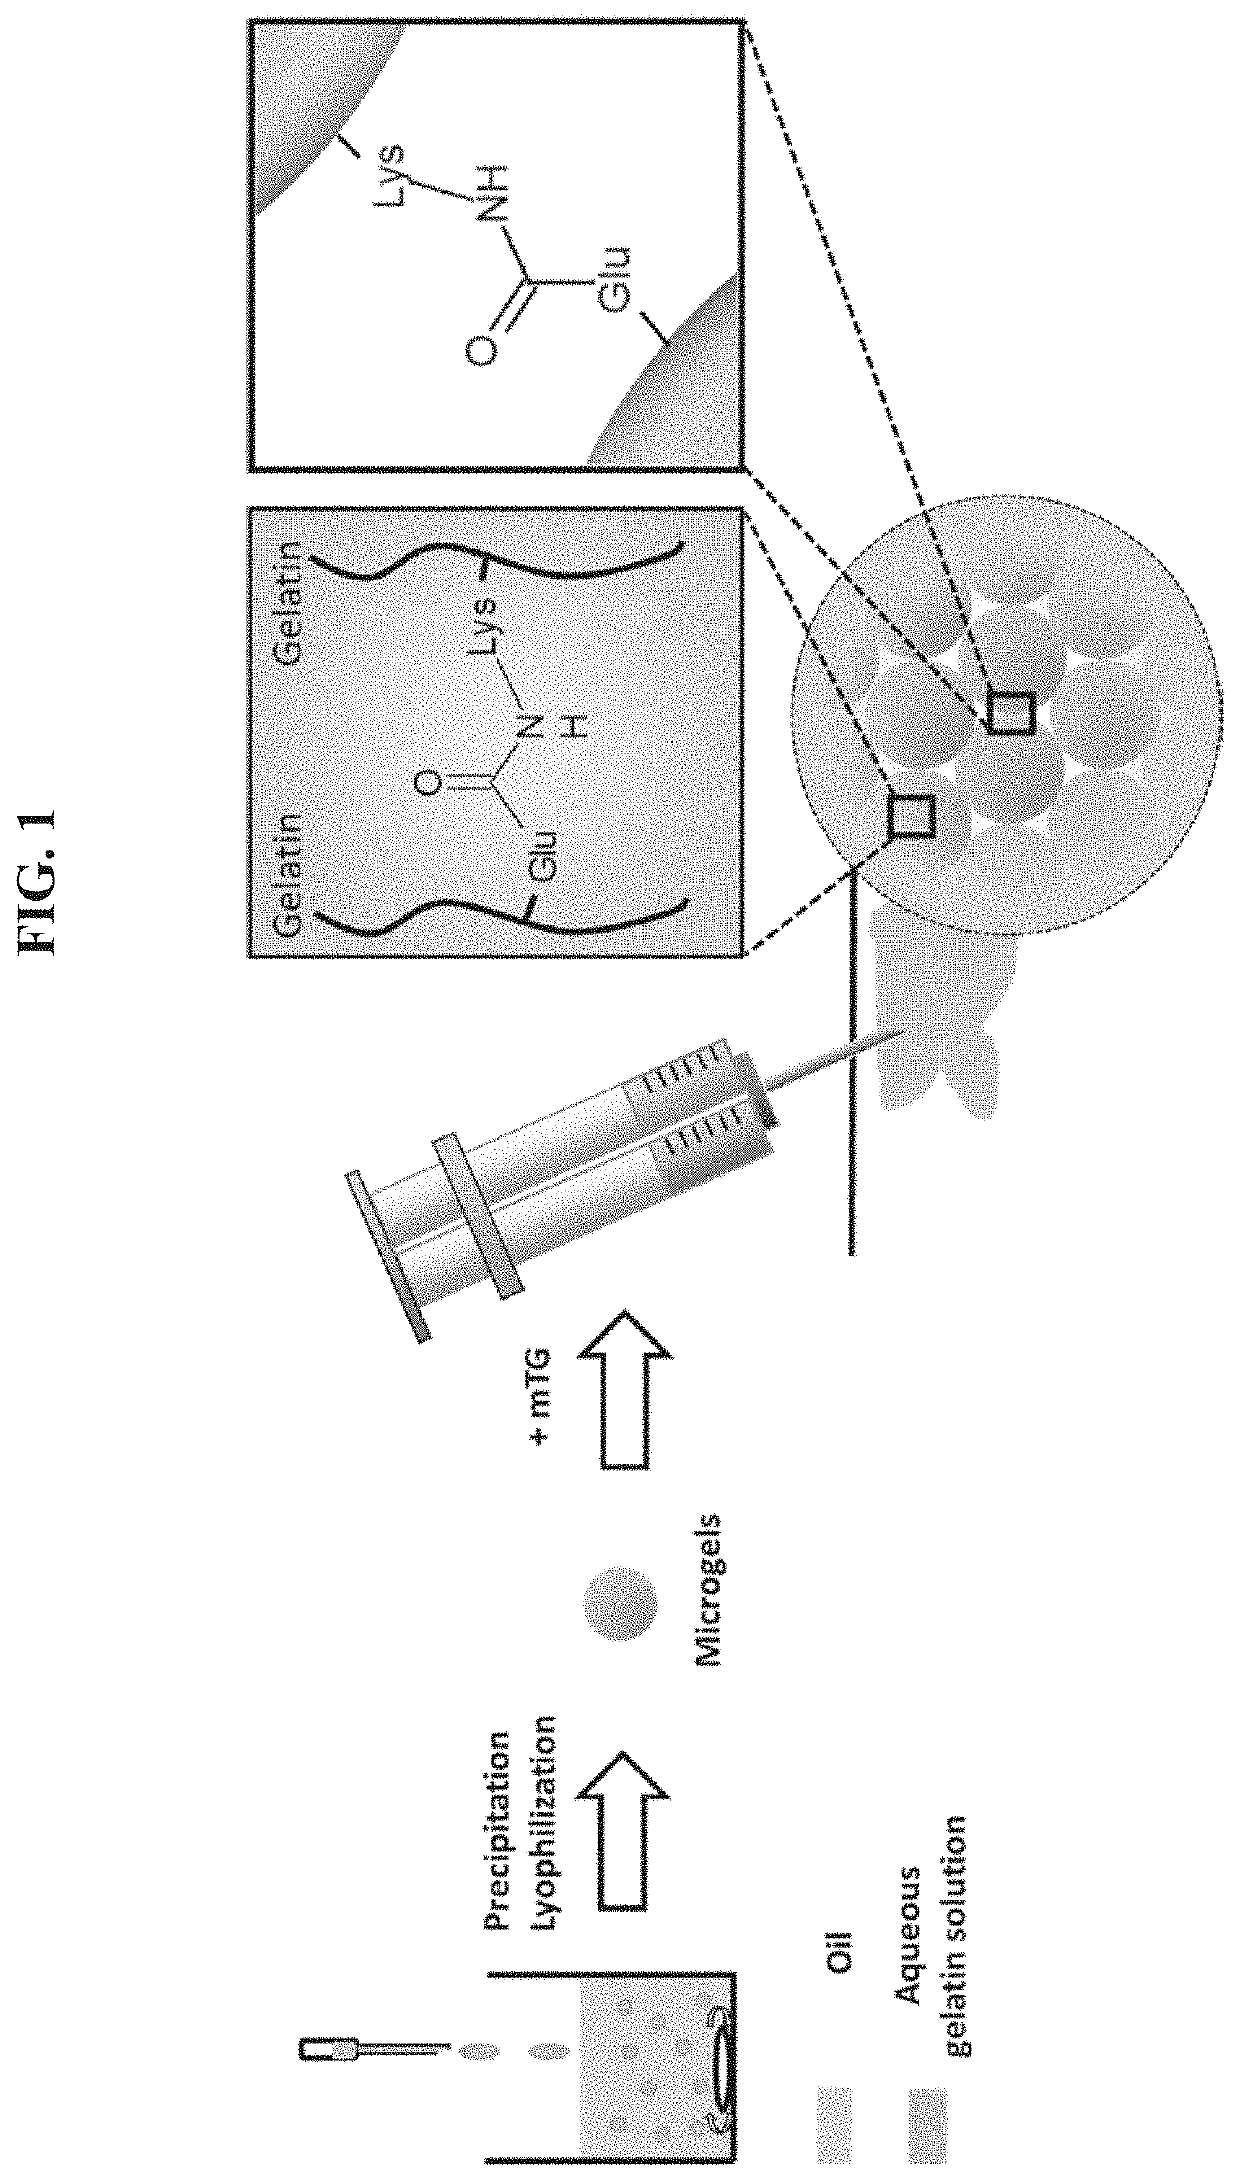 Injectable porous hydrogels